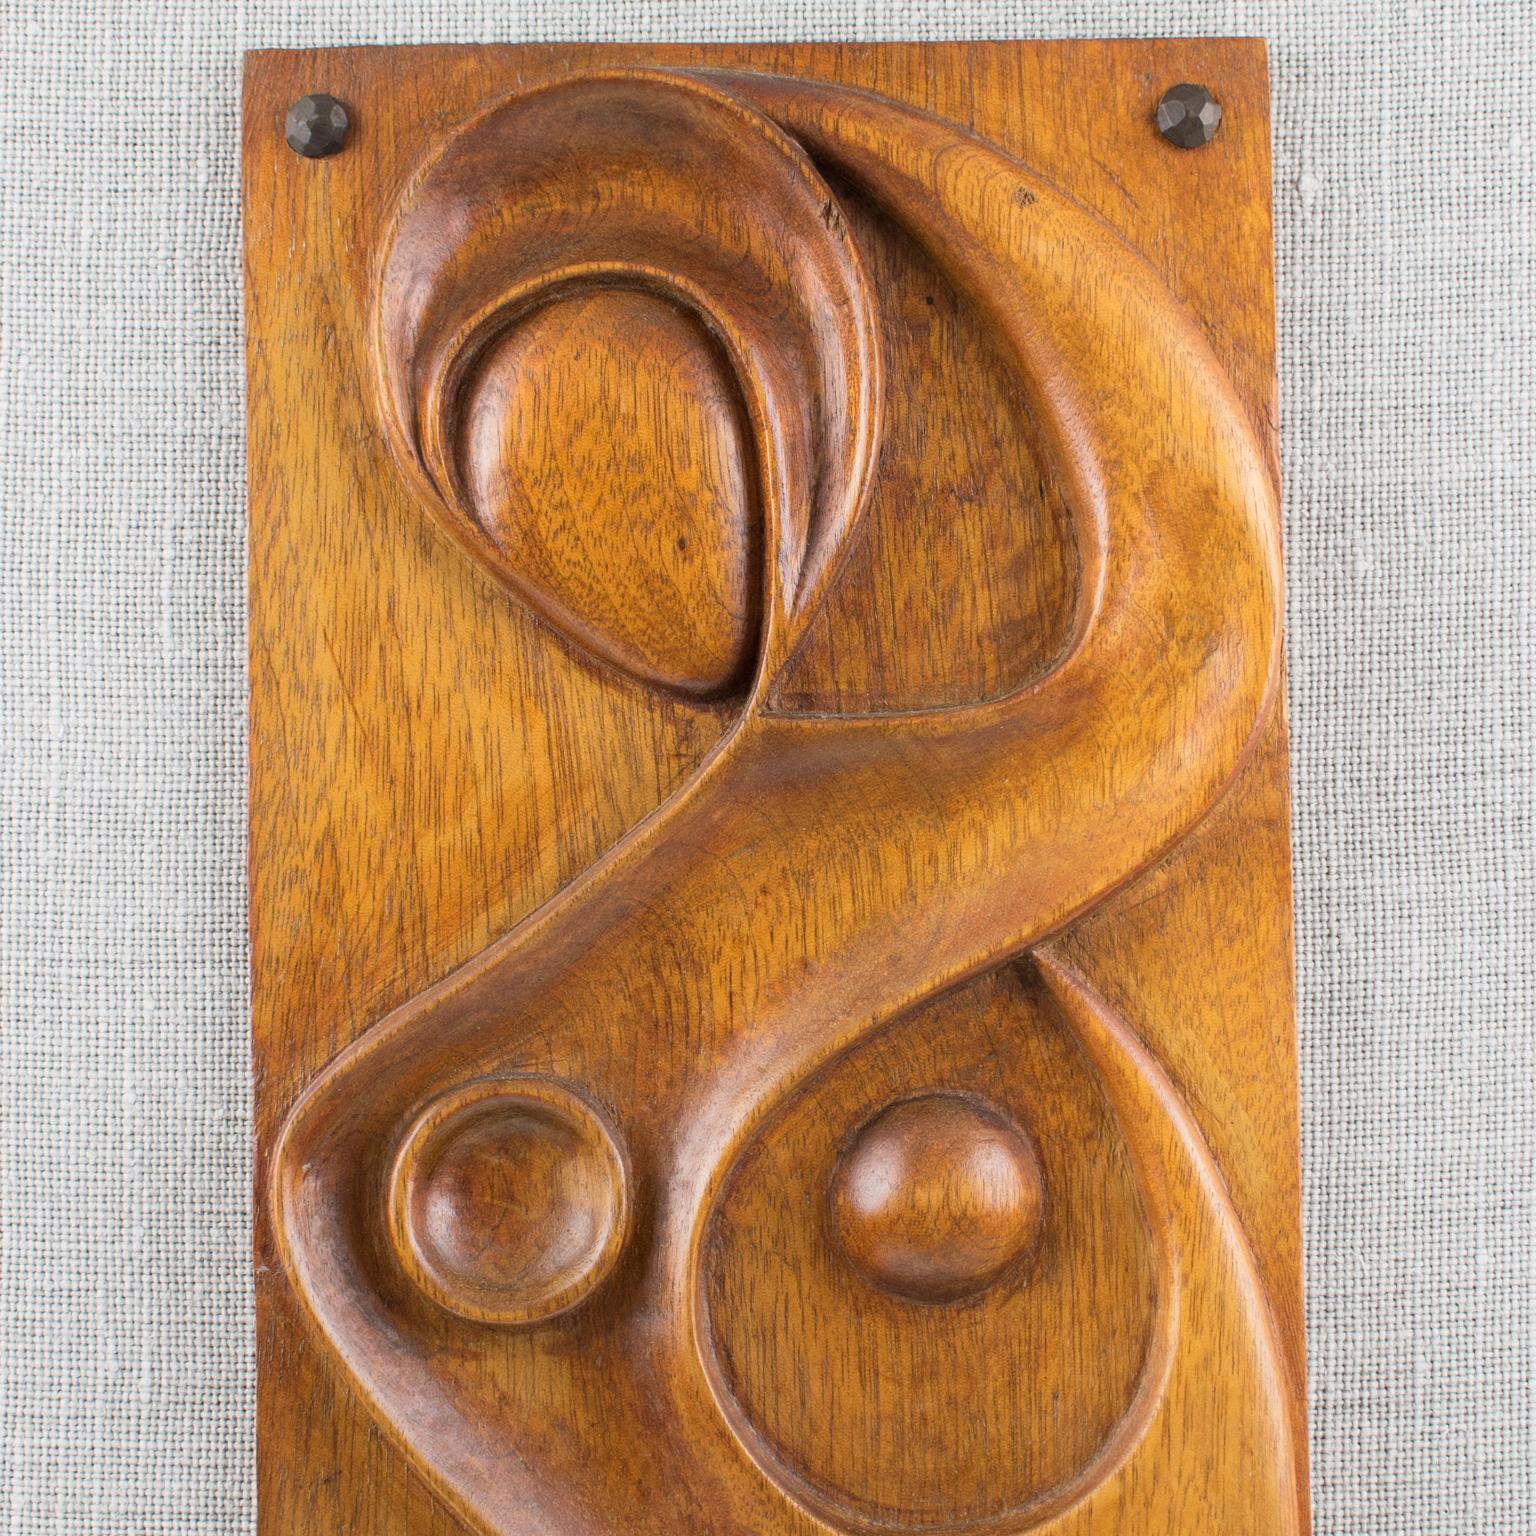 Abstract Wooden Wall-Mounted Art Sculpture Panel by Maxime Tendero For Sale 7